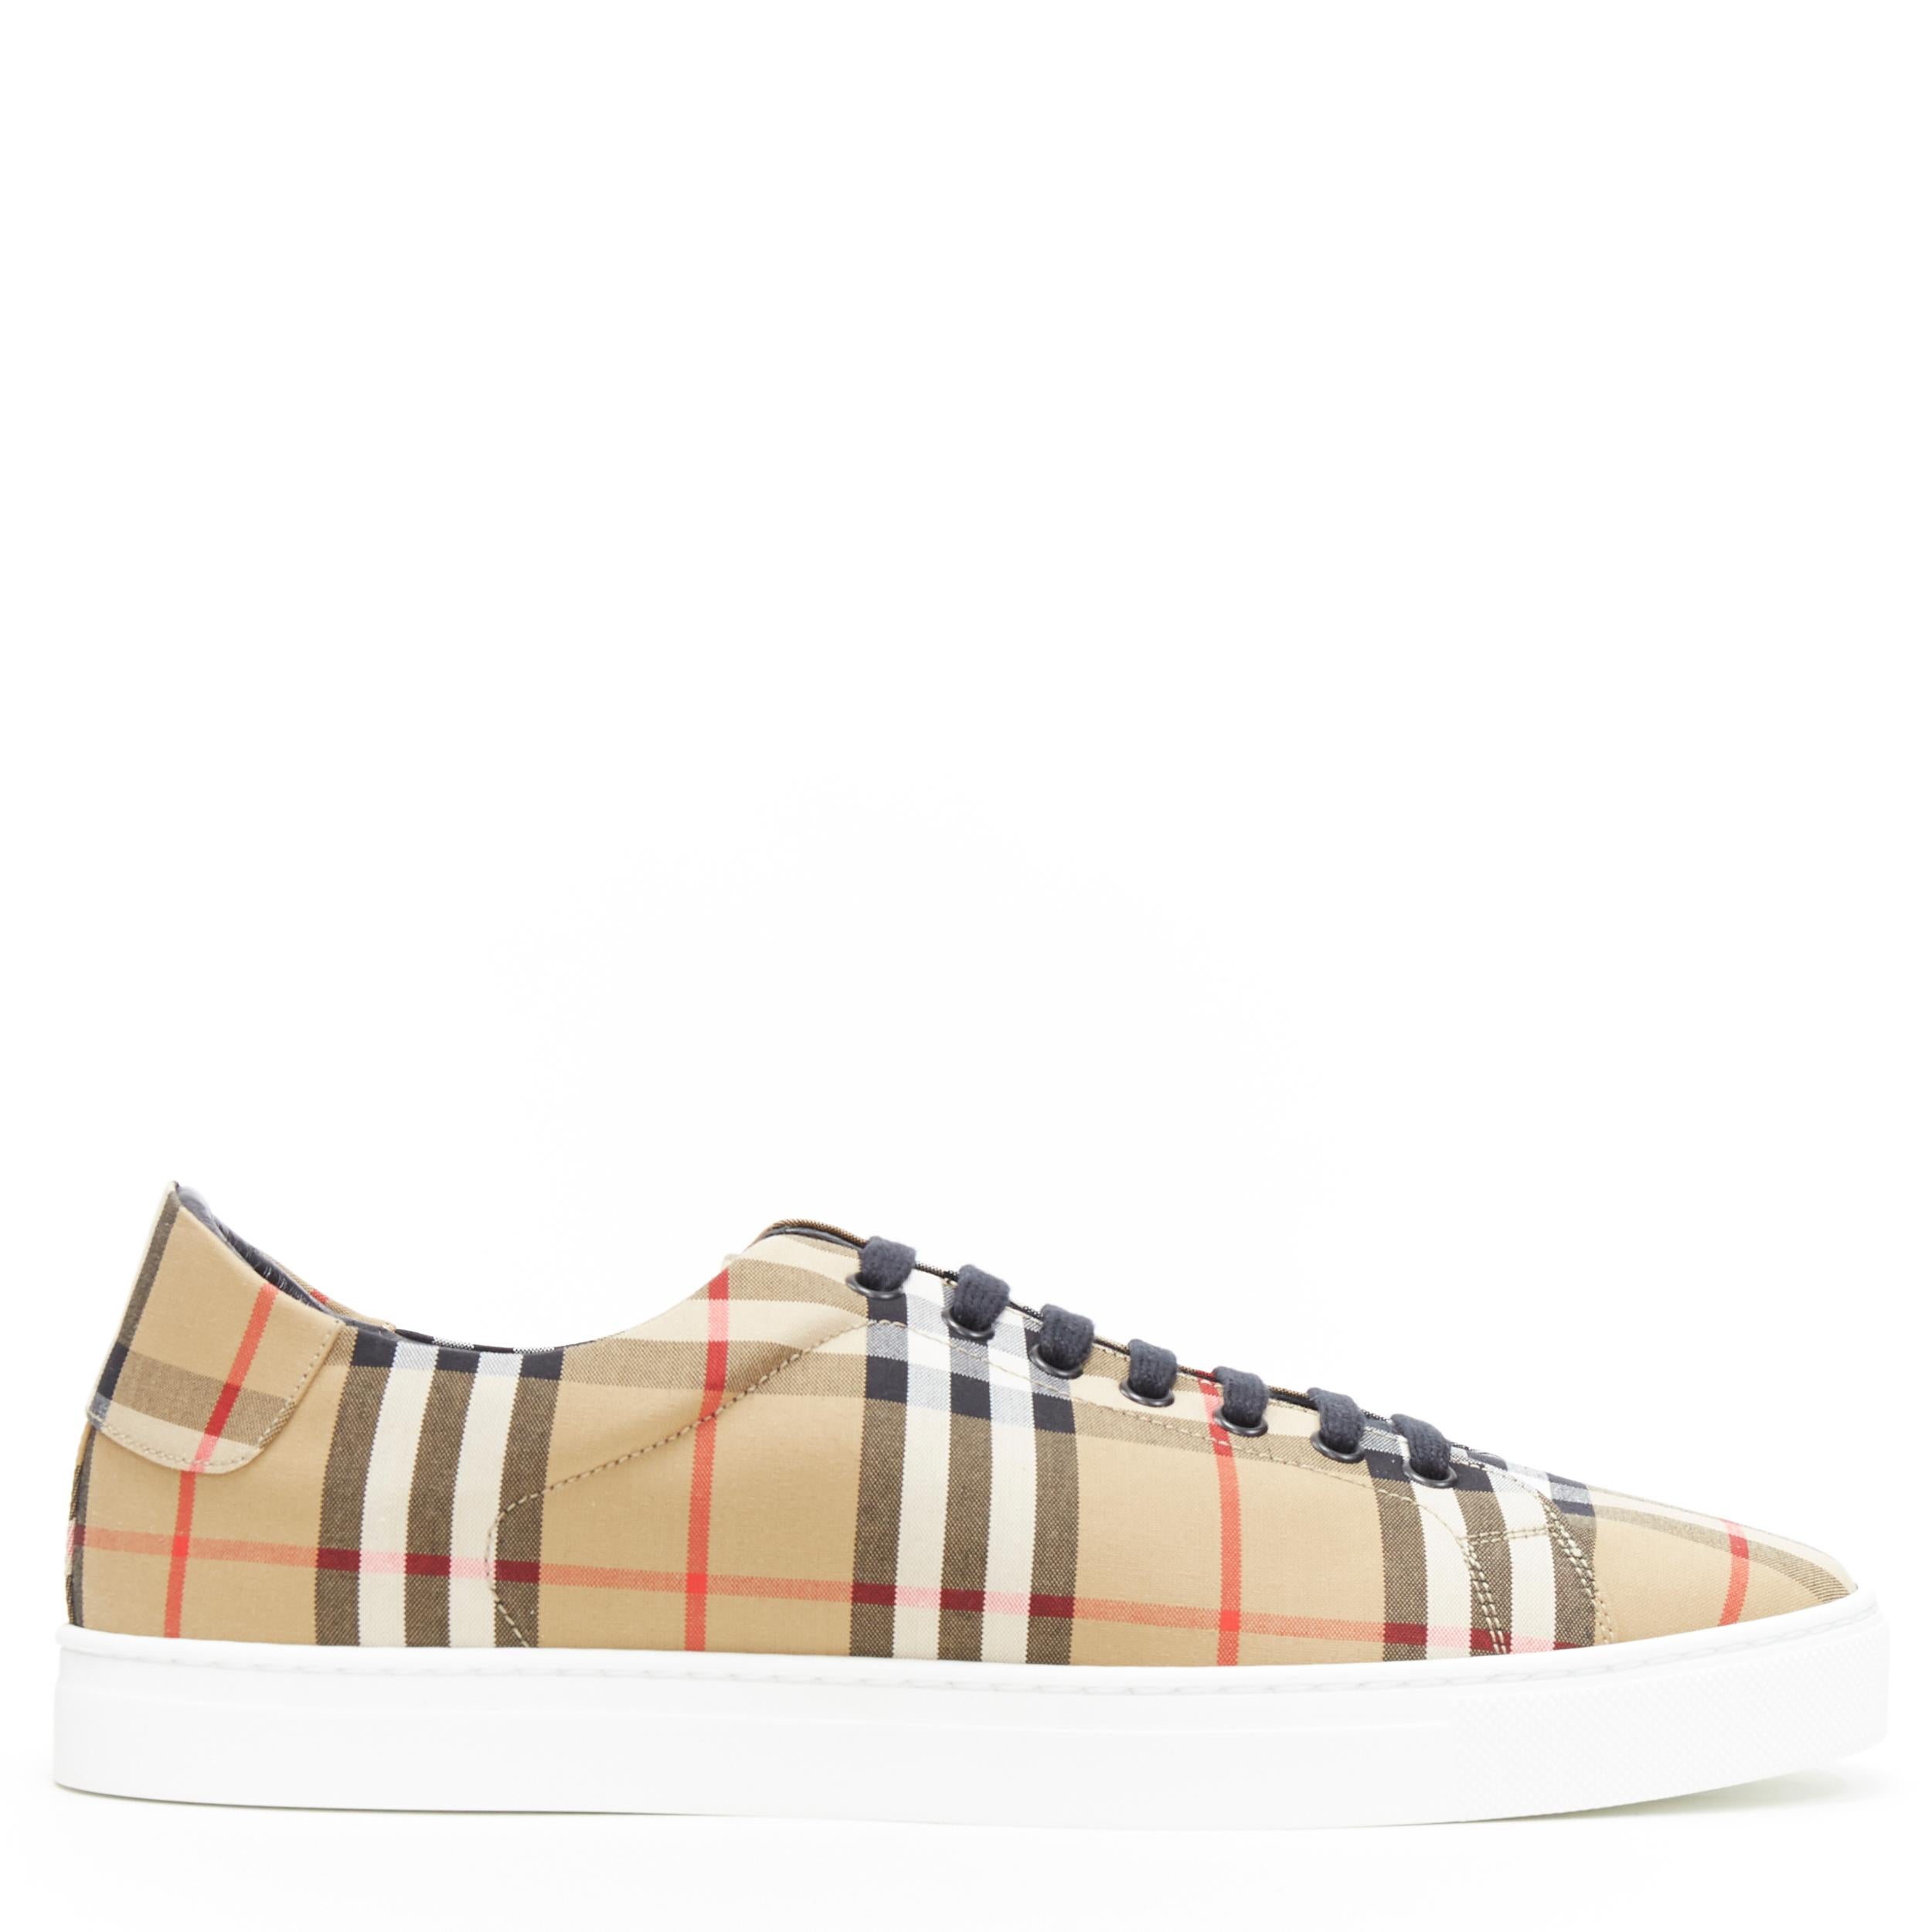 new BURBERRY TISCI Albert Antique Yellow House Check low top sneakers EU44.5
Brand: Burberry
Designer: Riccardo Tisci
Collection: 2019
Model Name / Style: Albert
Material: Cotton
Color: Brown
Pattern: Check
Closure: Lace up
Lining material: